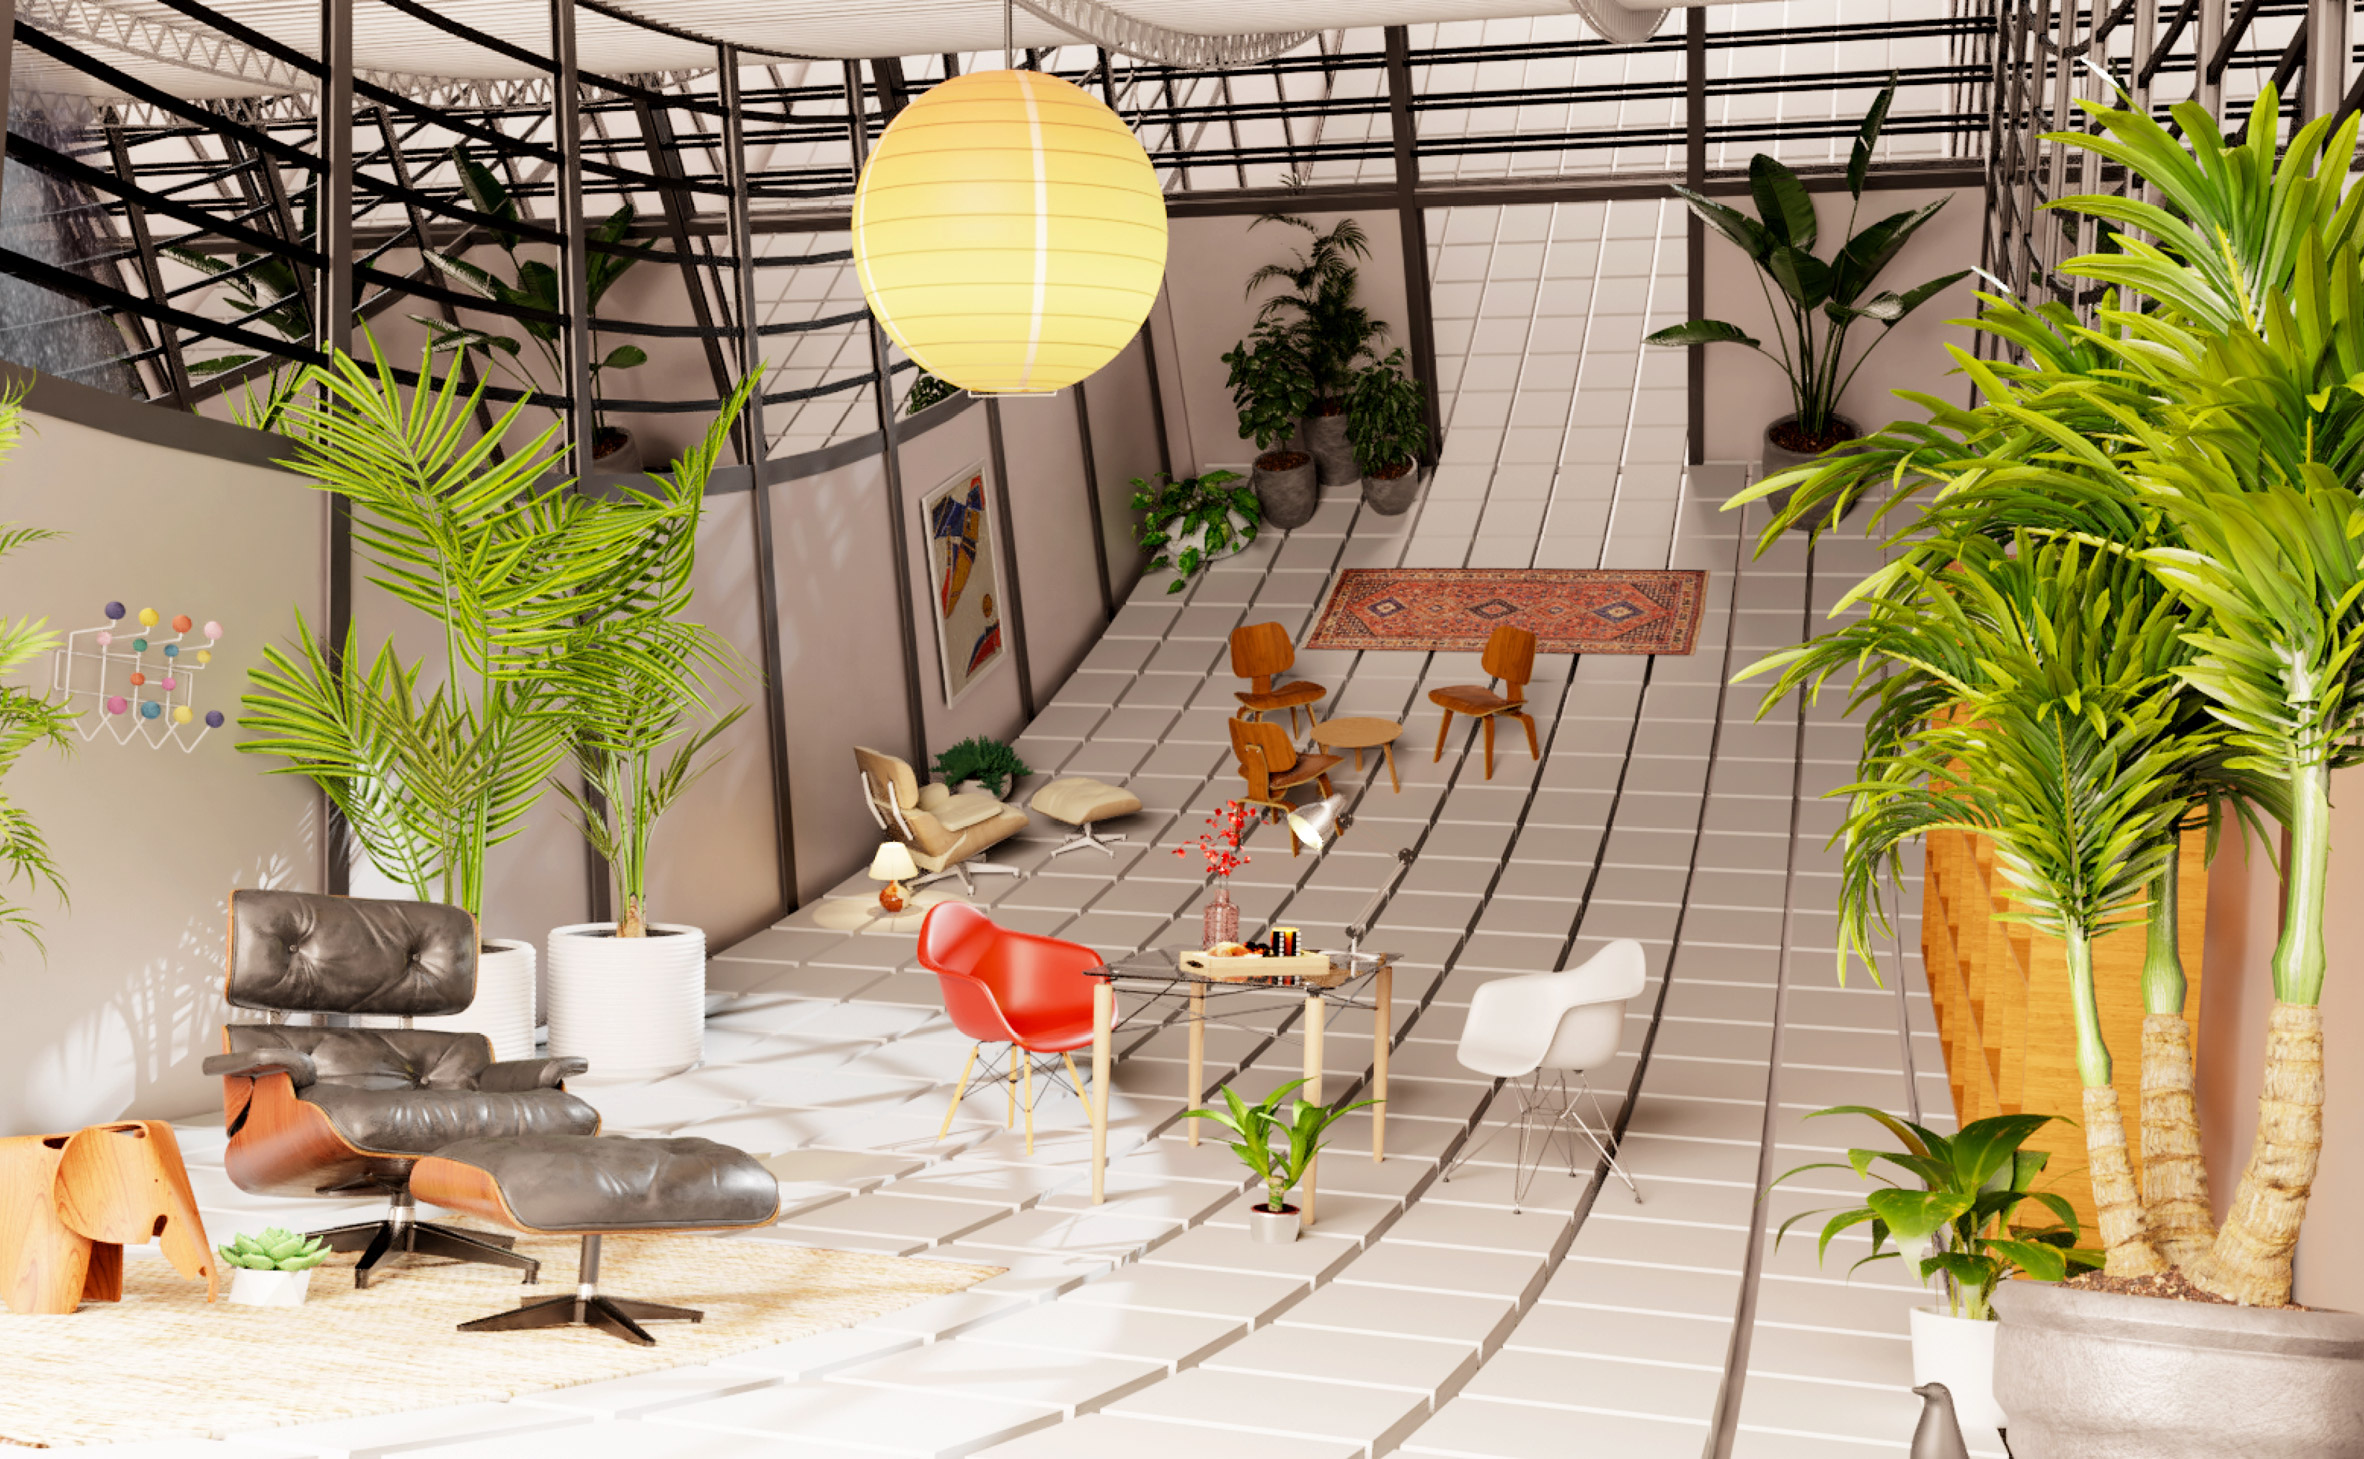 Image showing curved floor in interior space with furniture and plants